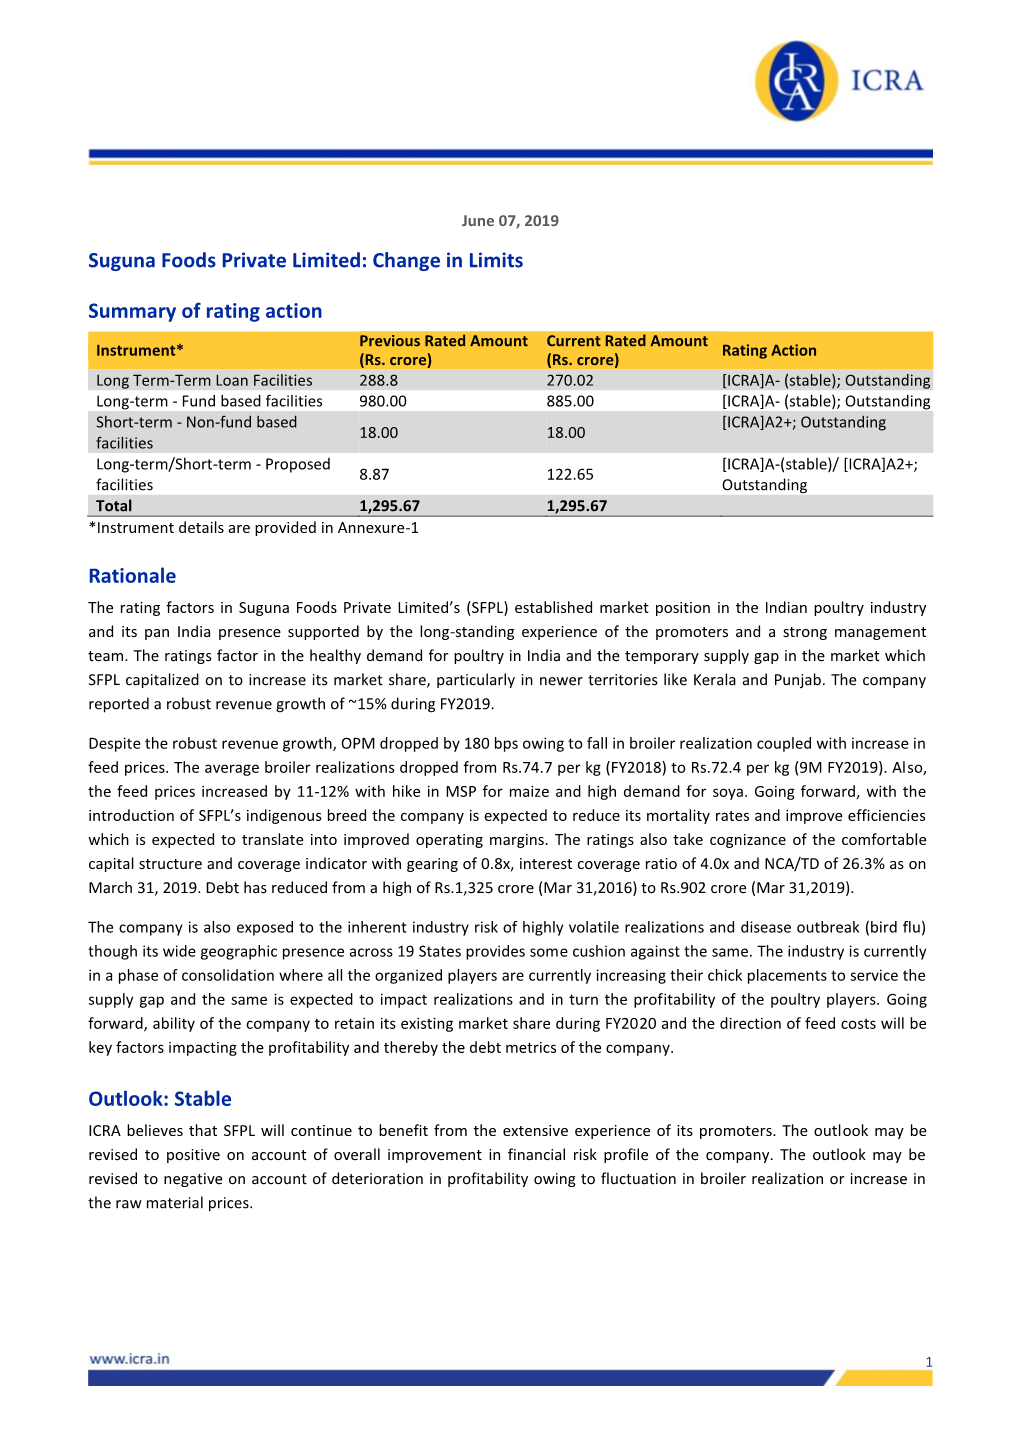 Suguna Foods Private Limited: Change in Limits